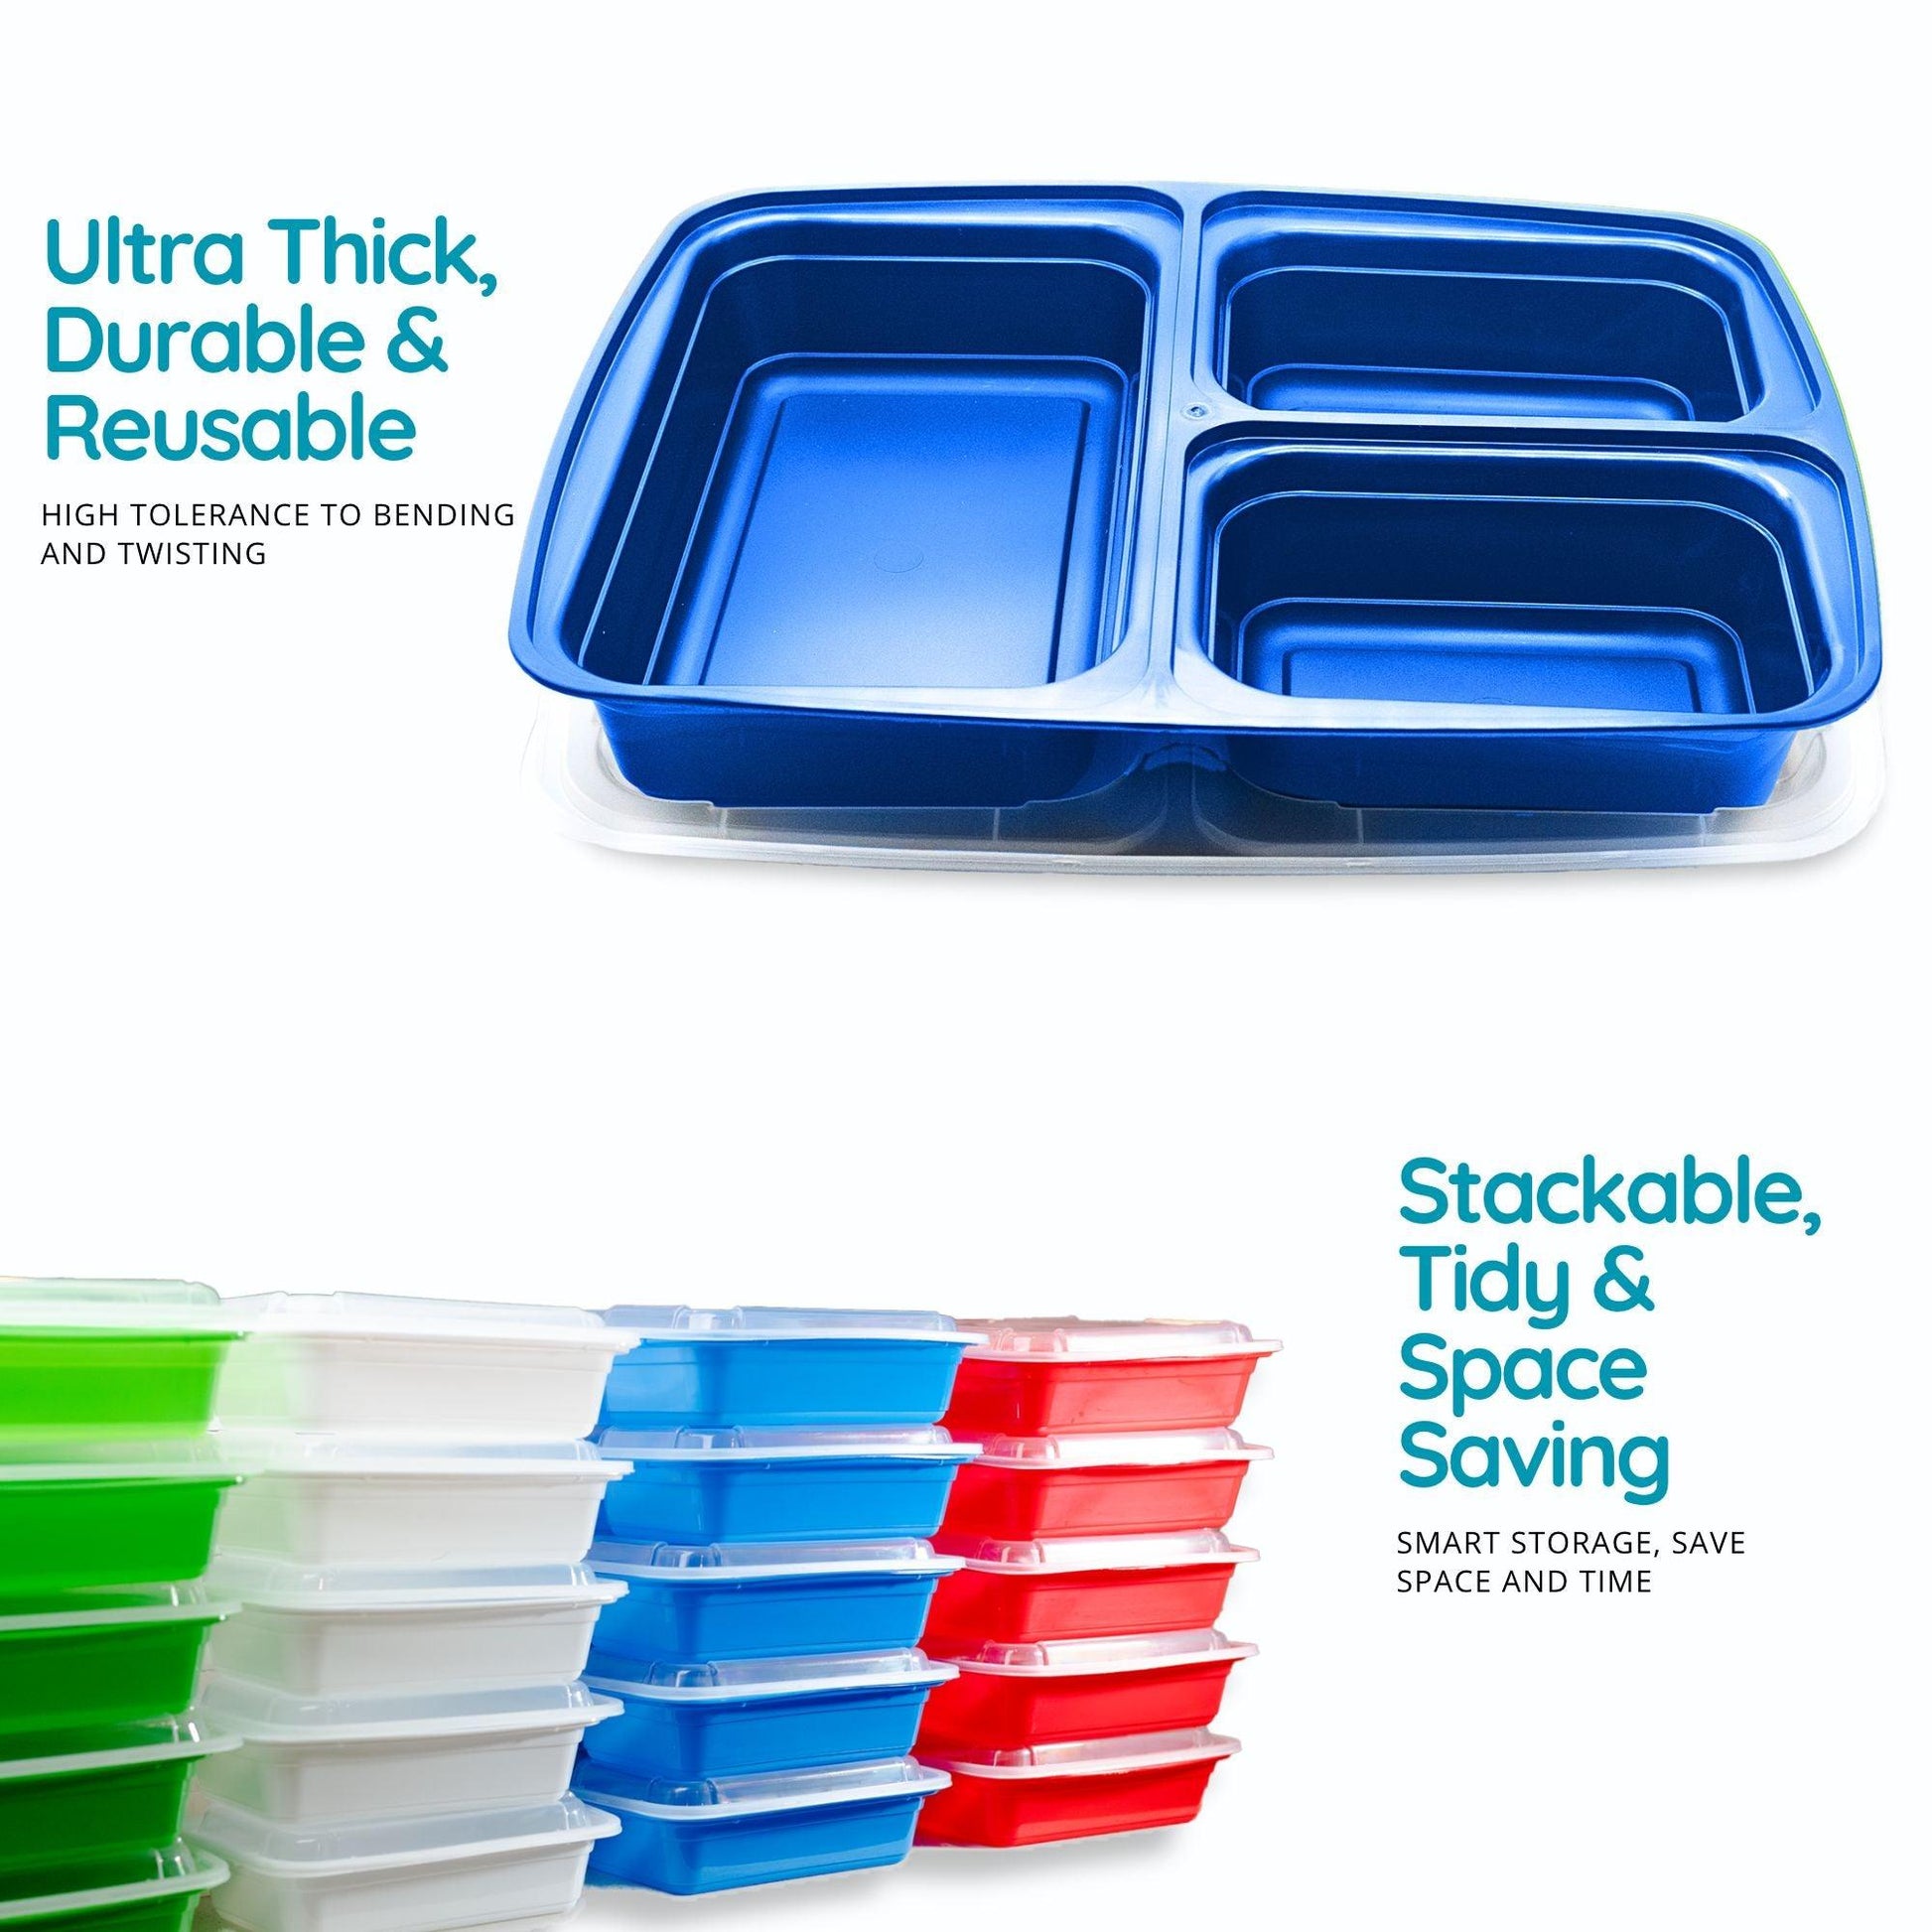 10 Pack 3-Compartment Reusable Meal Prep Containers Blue [942ml] - Jugglebox Australia